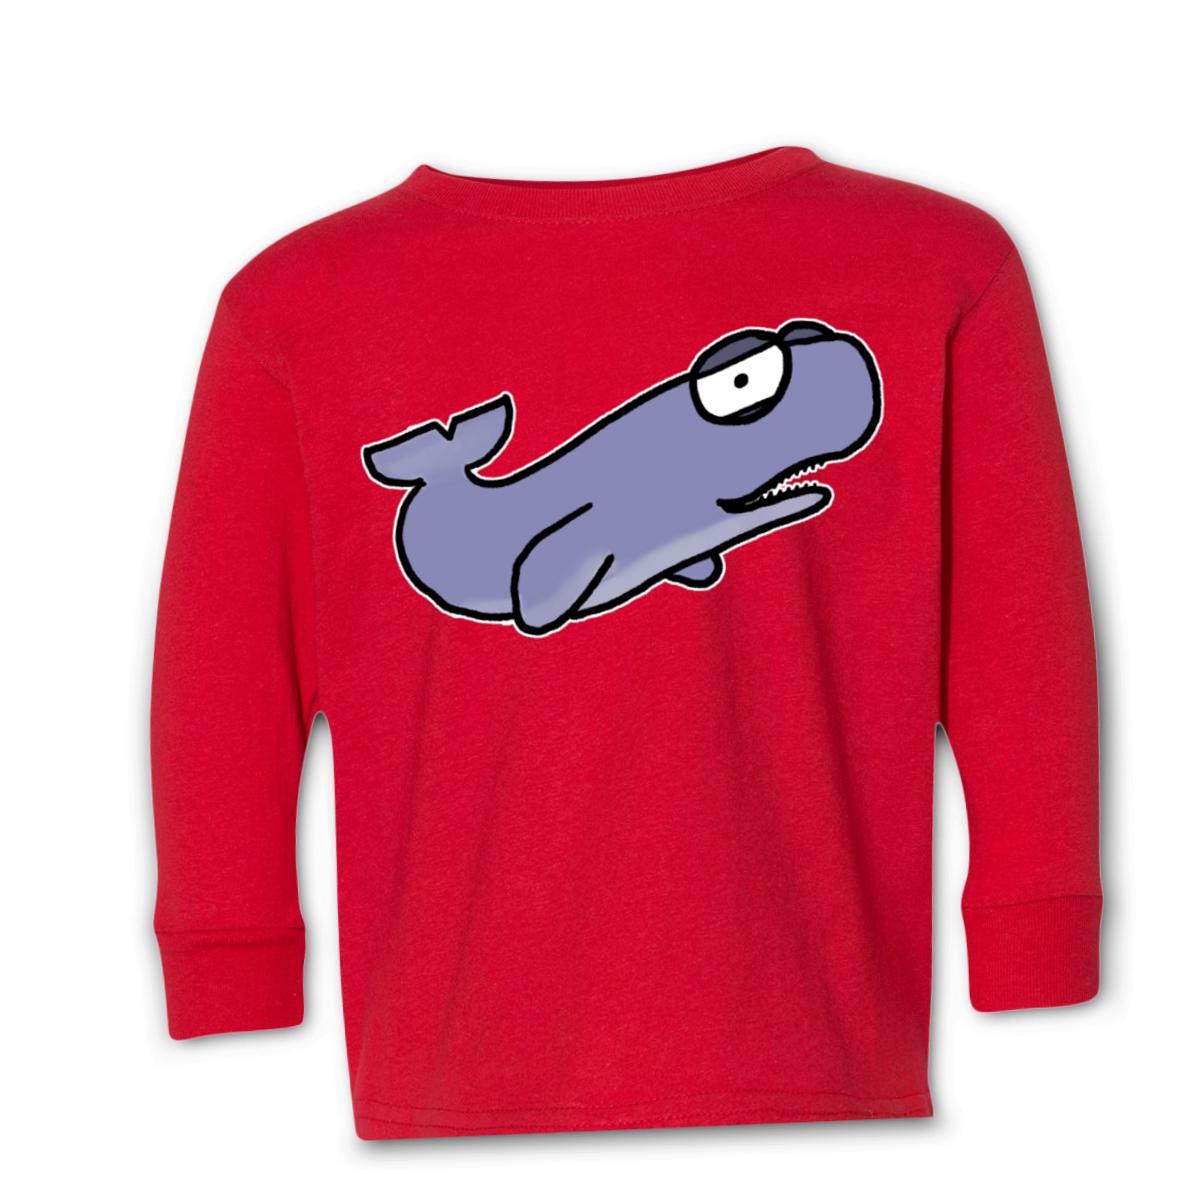 Sperm Whale Kid's Long Sleeve Tee Small red